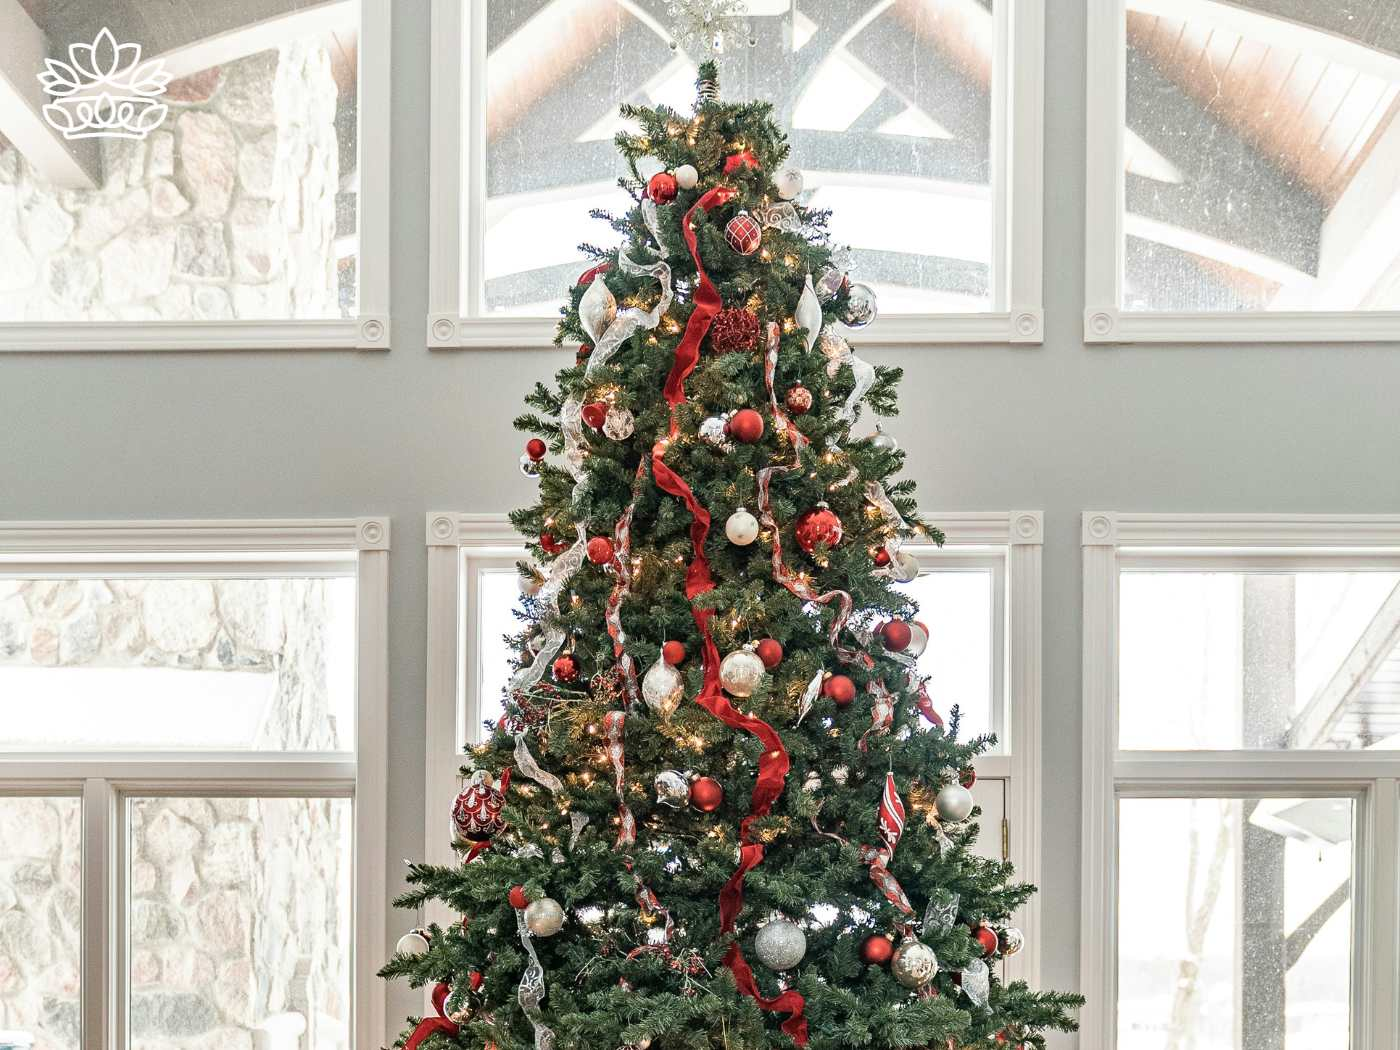 A majestic Christmas tree adorned with an array of Christmas flowers, baubles, and a ribbon, bathed in natural light from a sunny window, evoking a festive atmosphere with a Christmas cactus visible, available at Fabulous Flowers and Gifts.